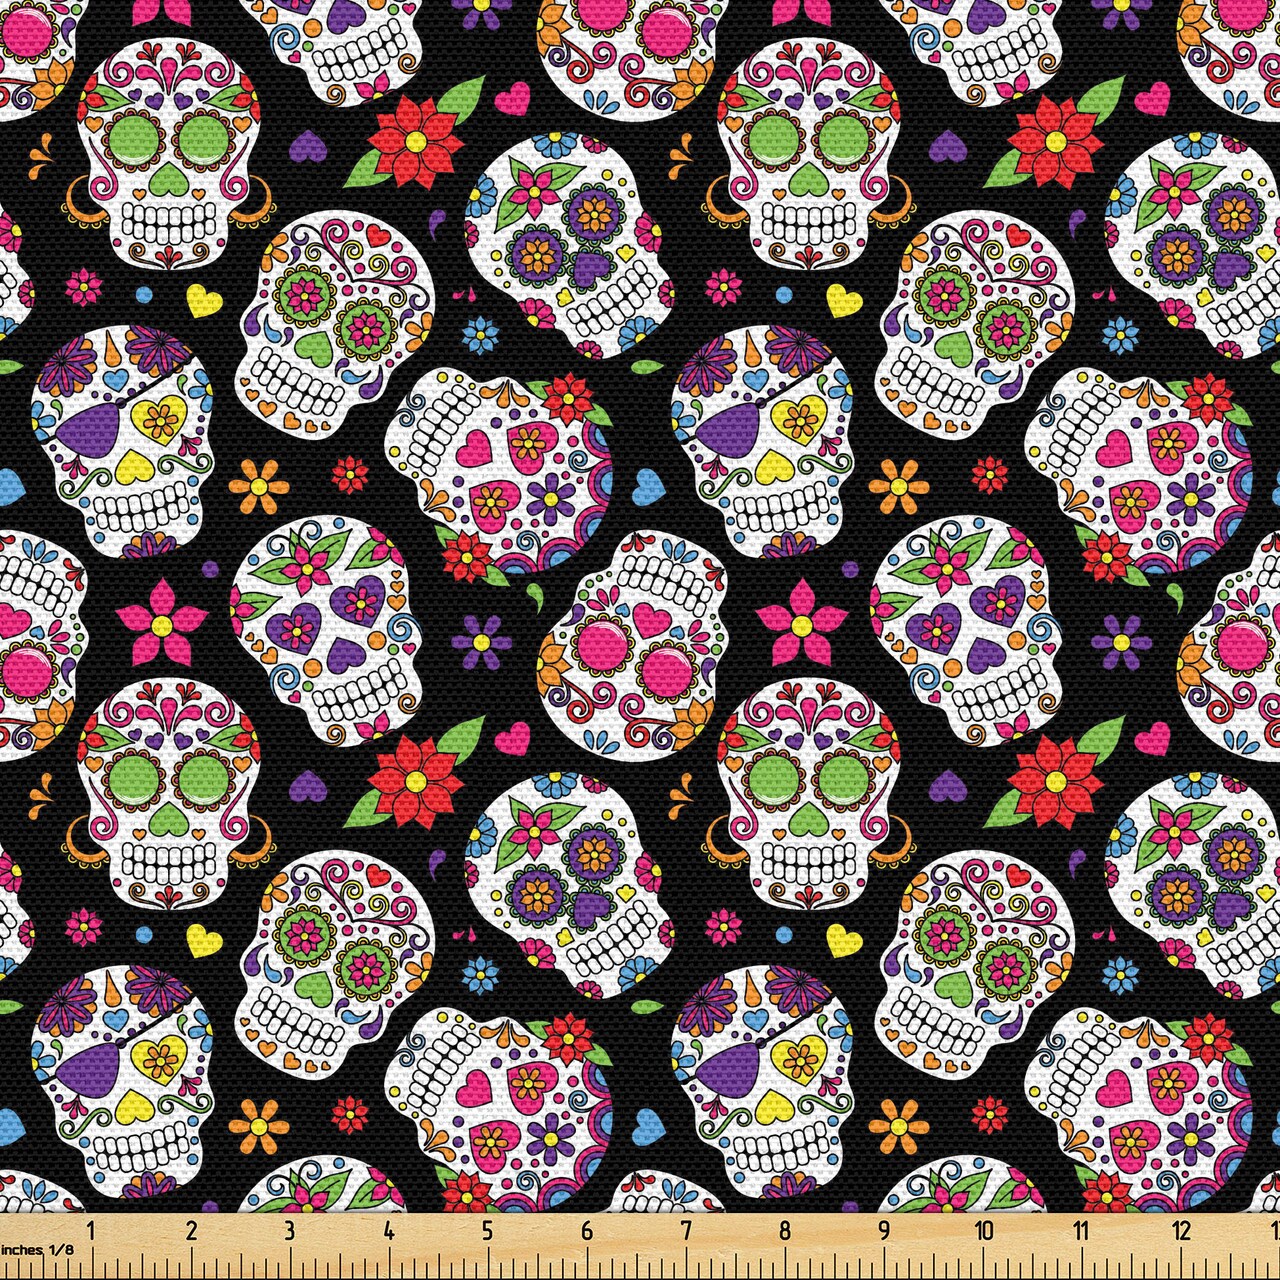 Ambesonne Sugar Skull Fabric by The Yard, All Souls Day Floral Colorful Sugar Skulls Flowers on Dark Background Print, Decorative Fabric for Upholstery and Home Accents, 2 Yards, Black Fuchsia